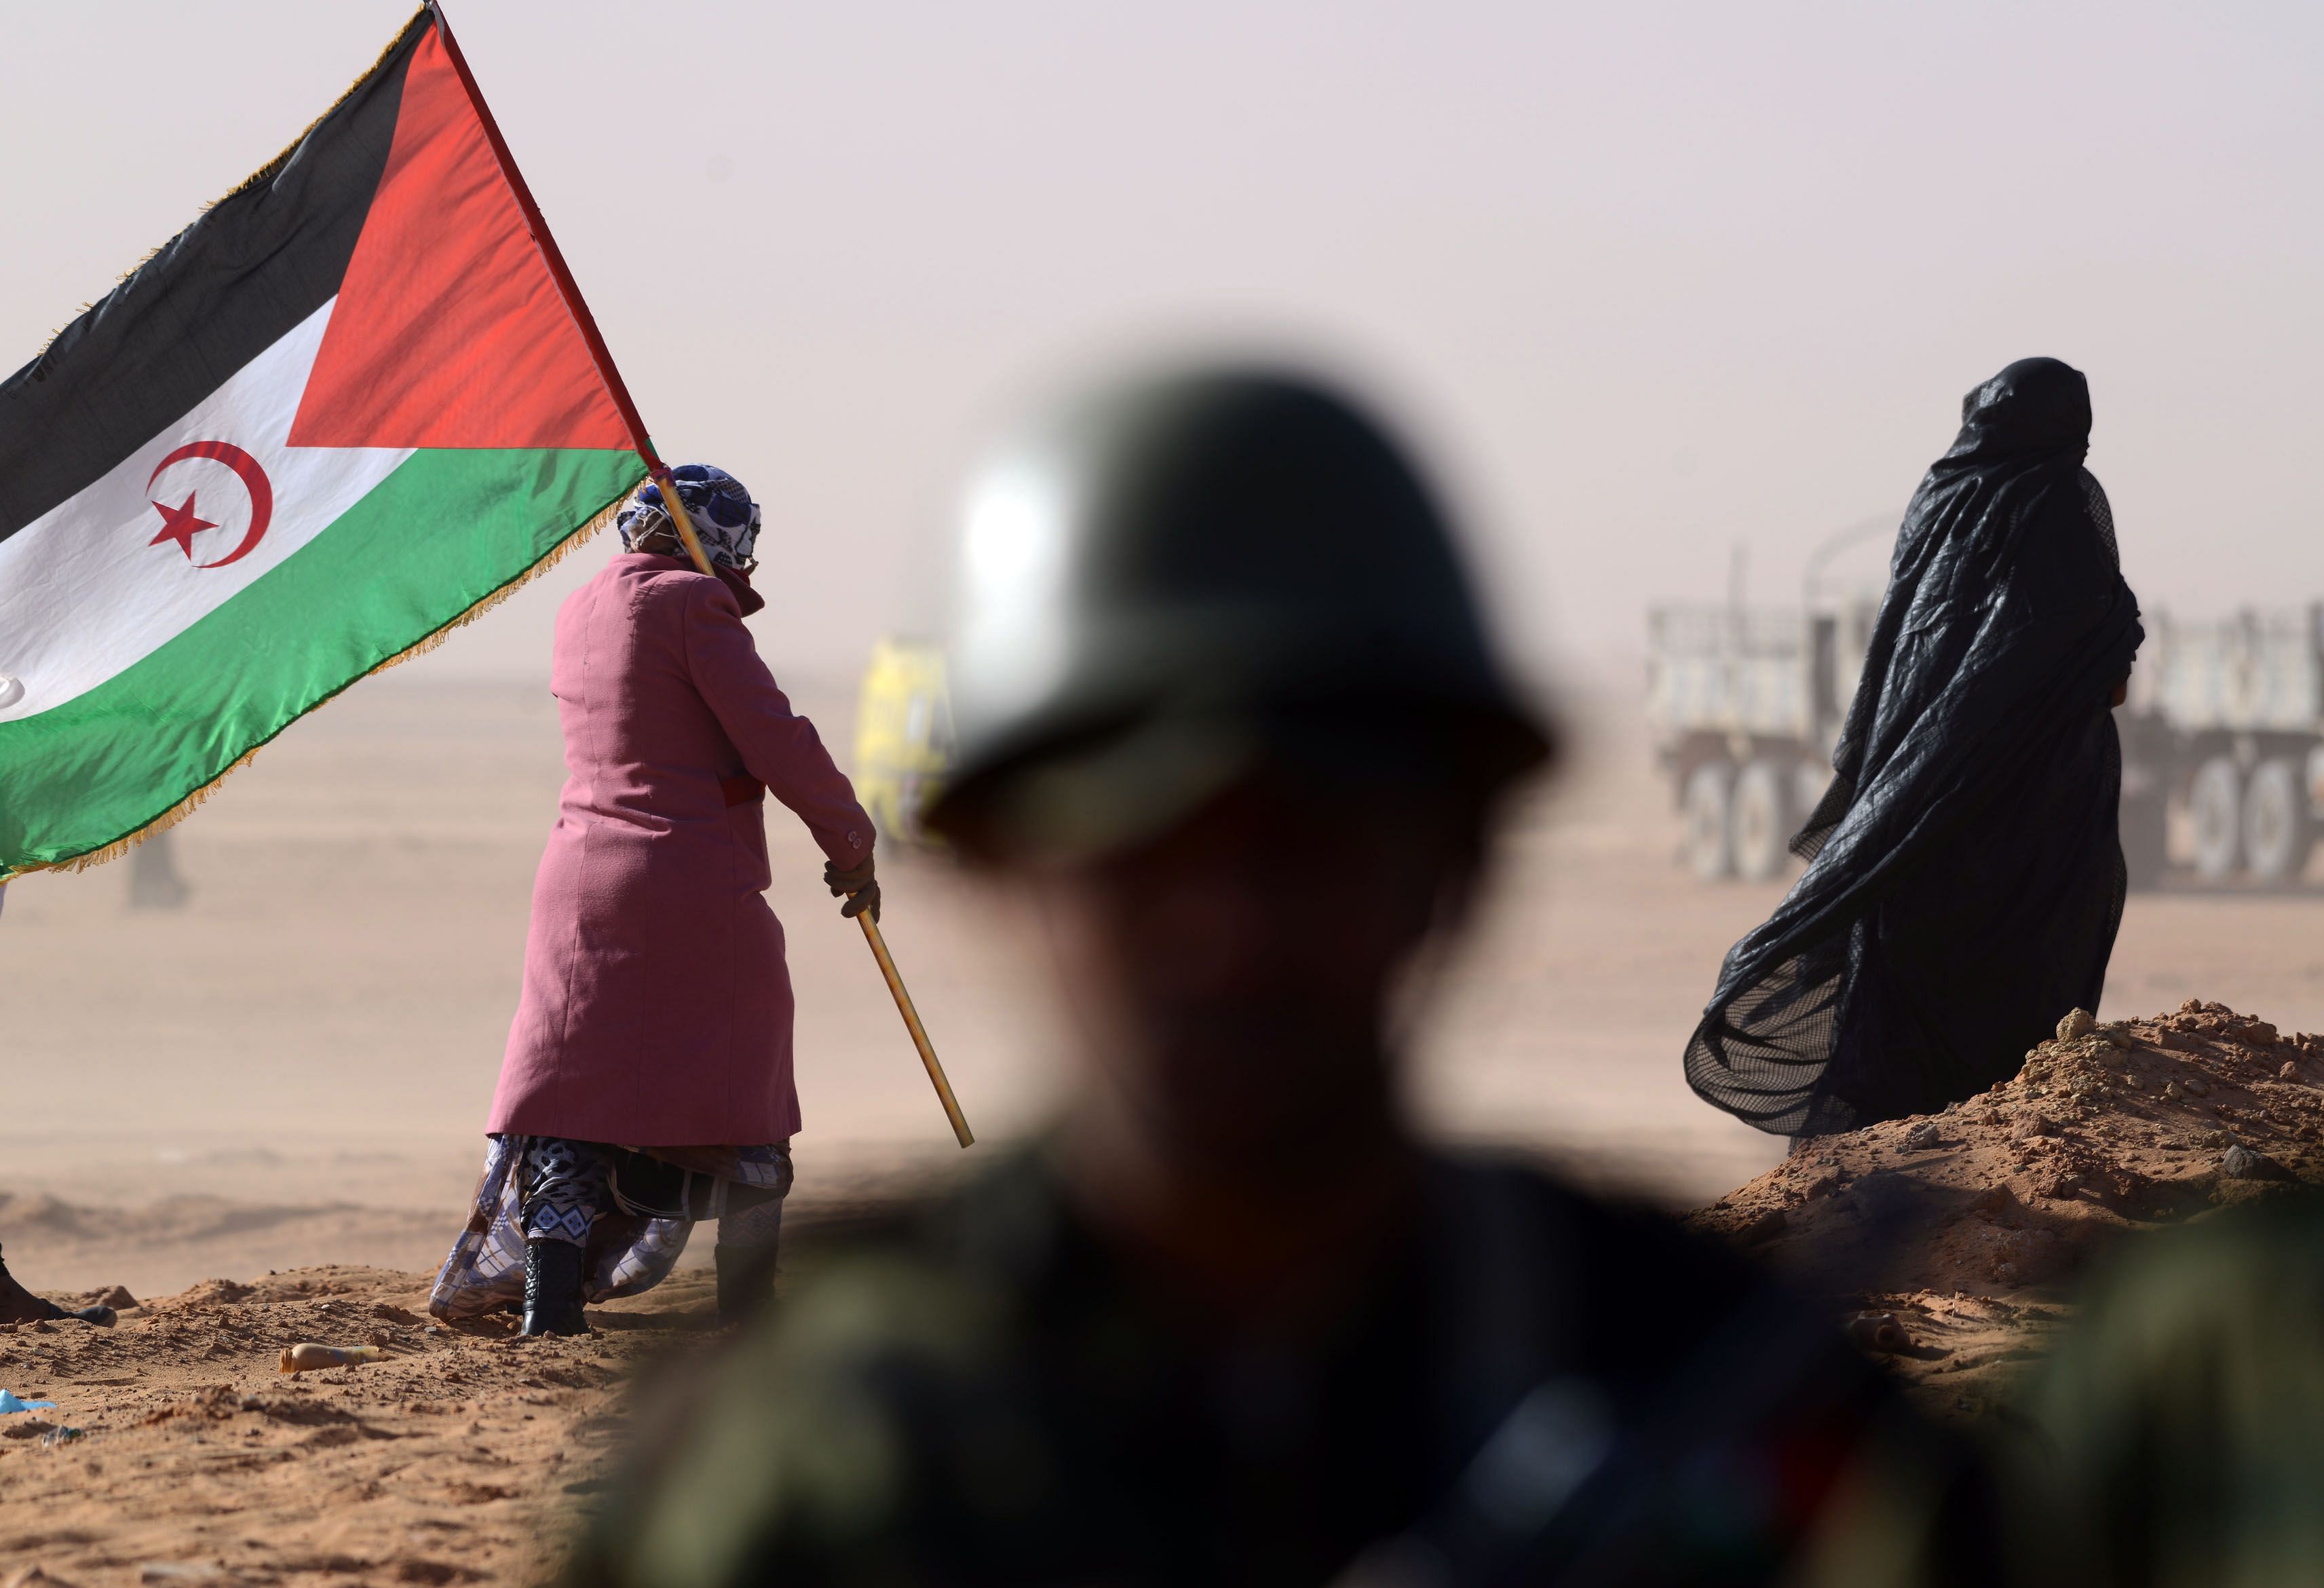 A Sahrawi woman holds a Polisario Front's flag during a ceremony to mark 40 years after the Front proclaimed the Sahrawi Arab Democratic Republic (SADR) in the disputed territory of Western Sahara. - Morocco announced on November 13, 2020 that its troops have launched an operation in no man's land on the southern border of the Western Sahara to end "provocations" by the pro-independence Polisario Front. Credit: AFP Photo